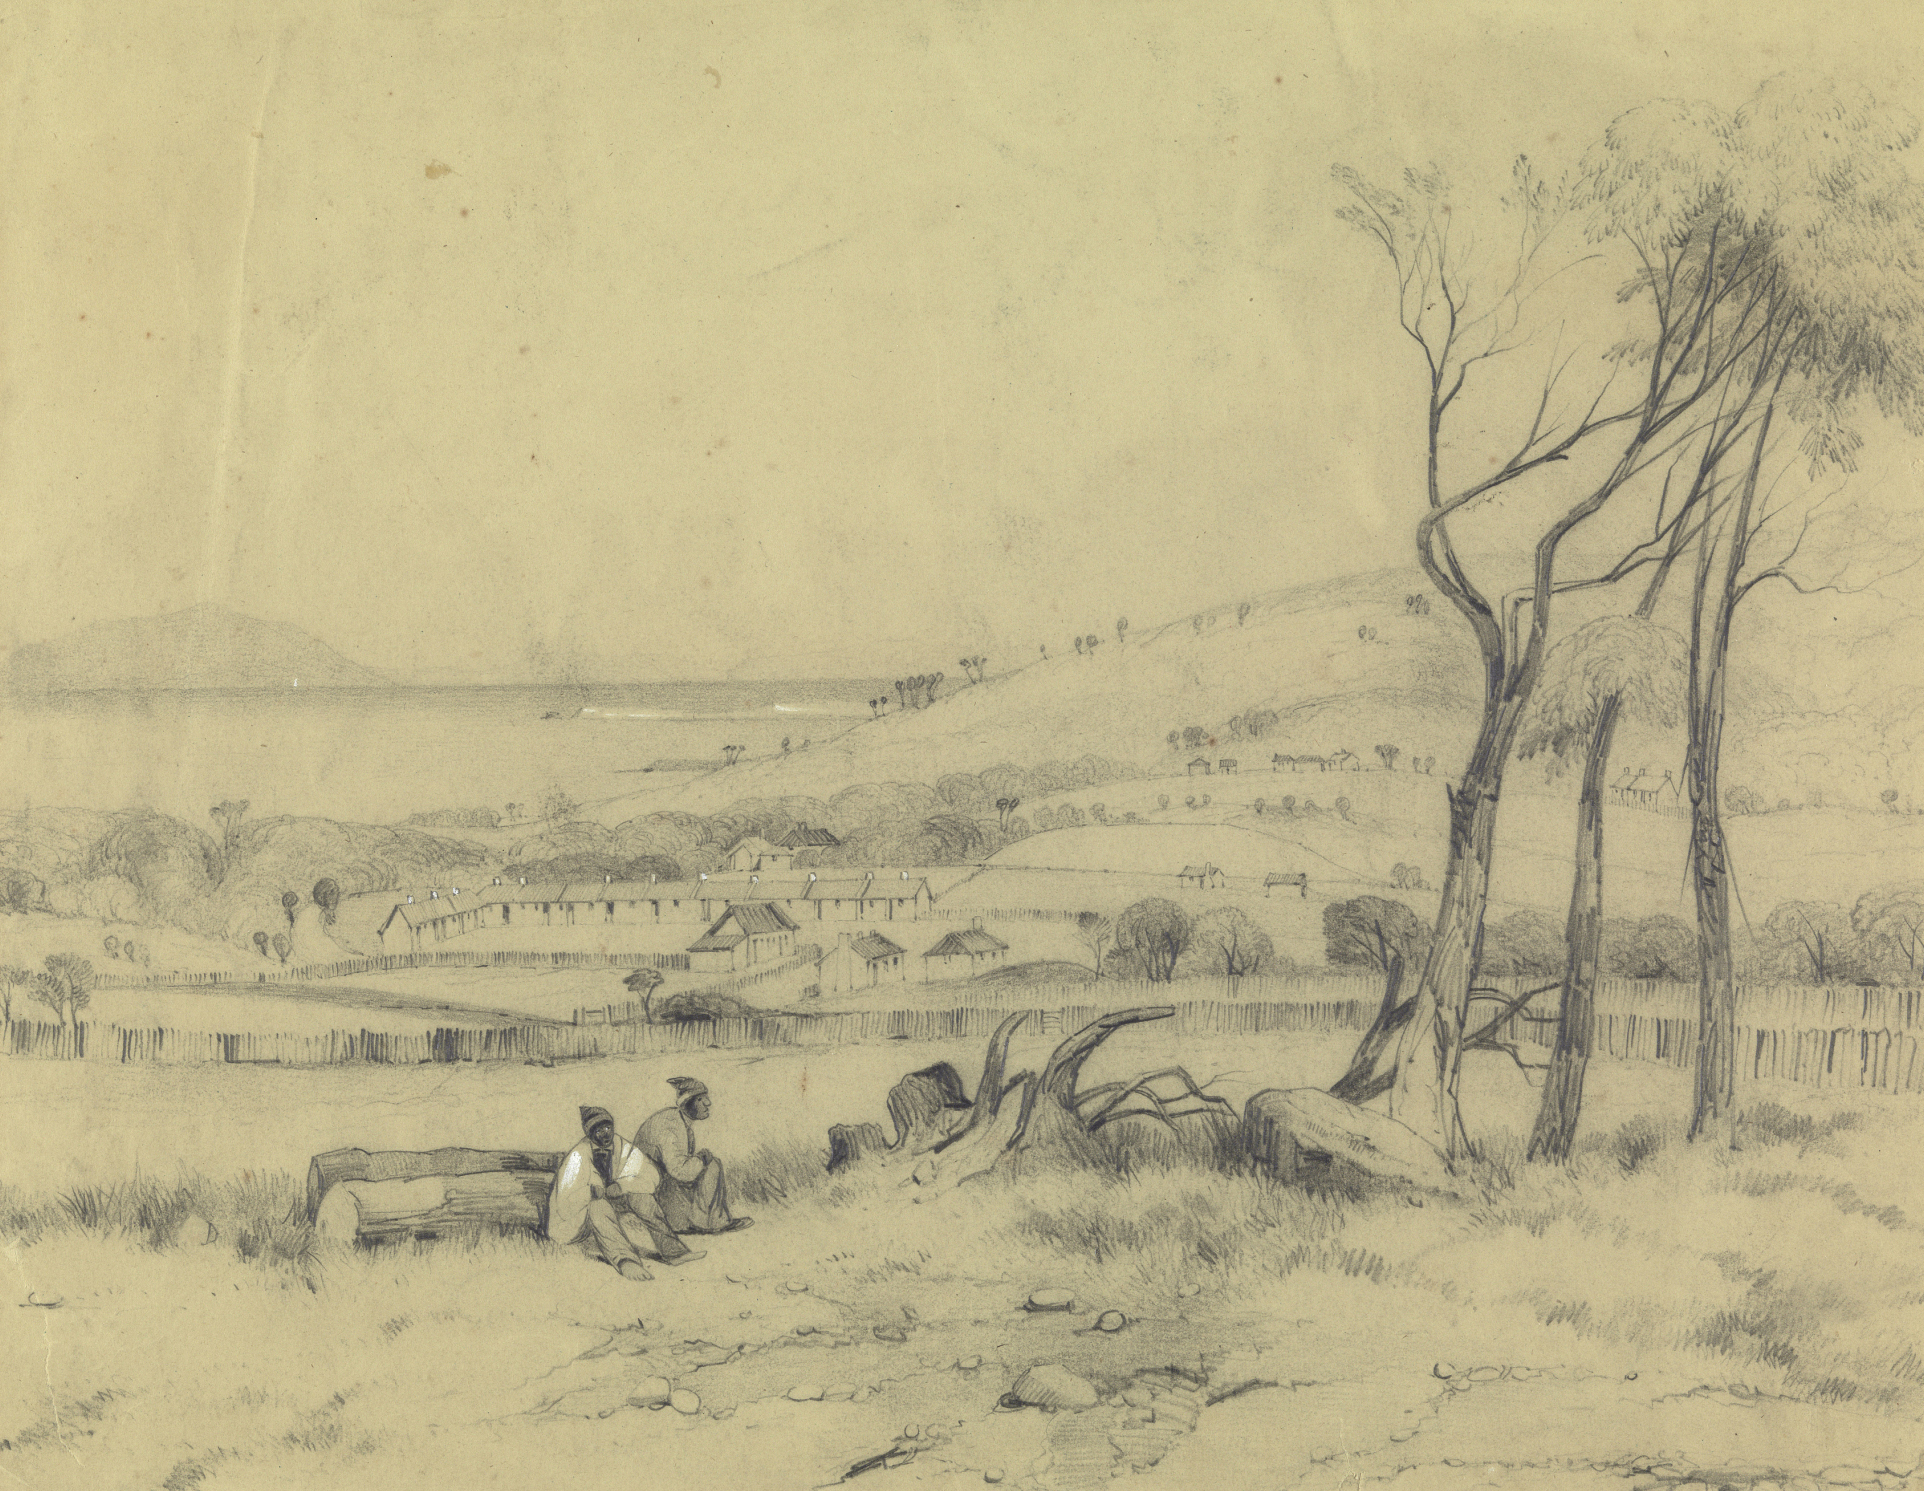 Residence of the Aborigines, Flinders Island, by John Skinner Prout, 1846